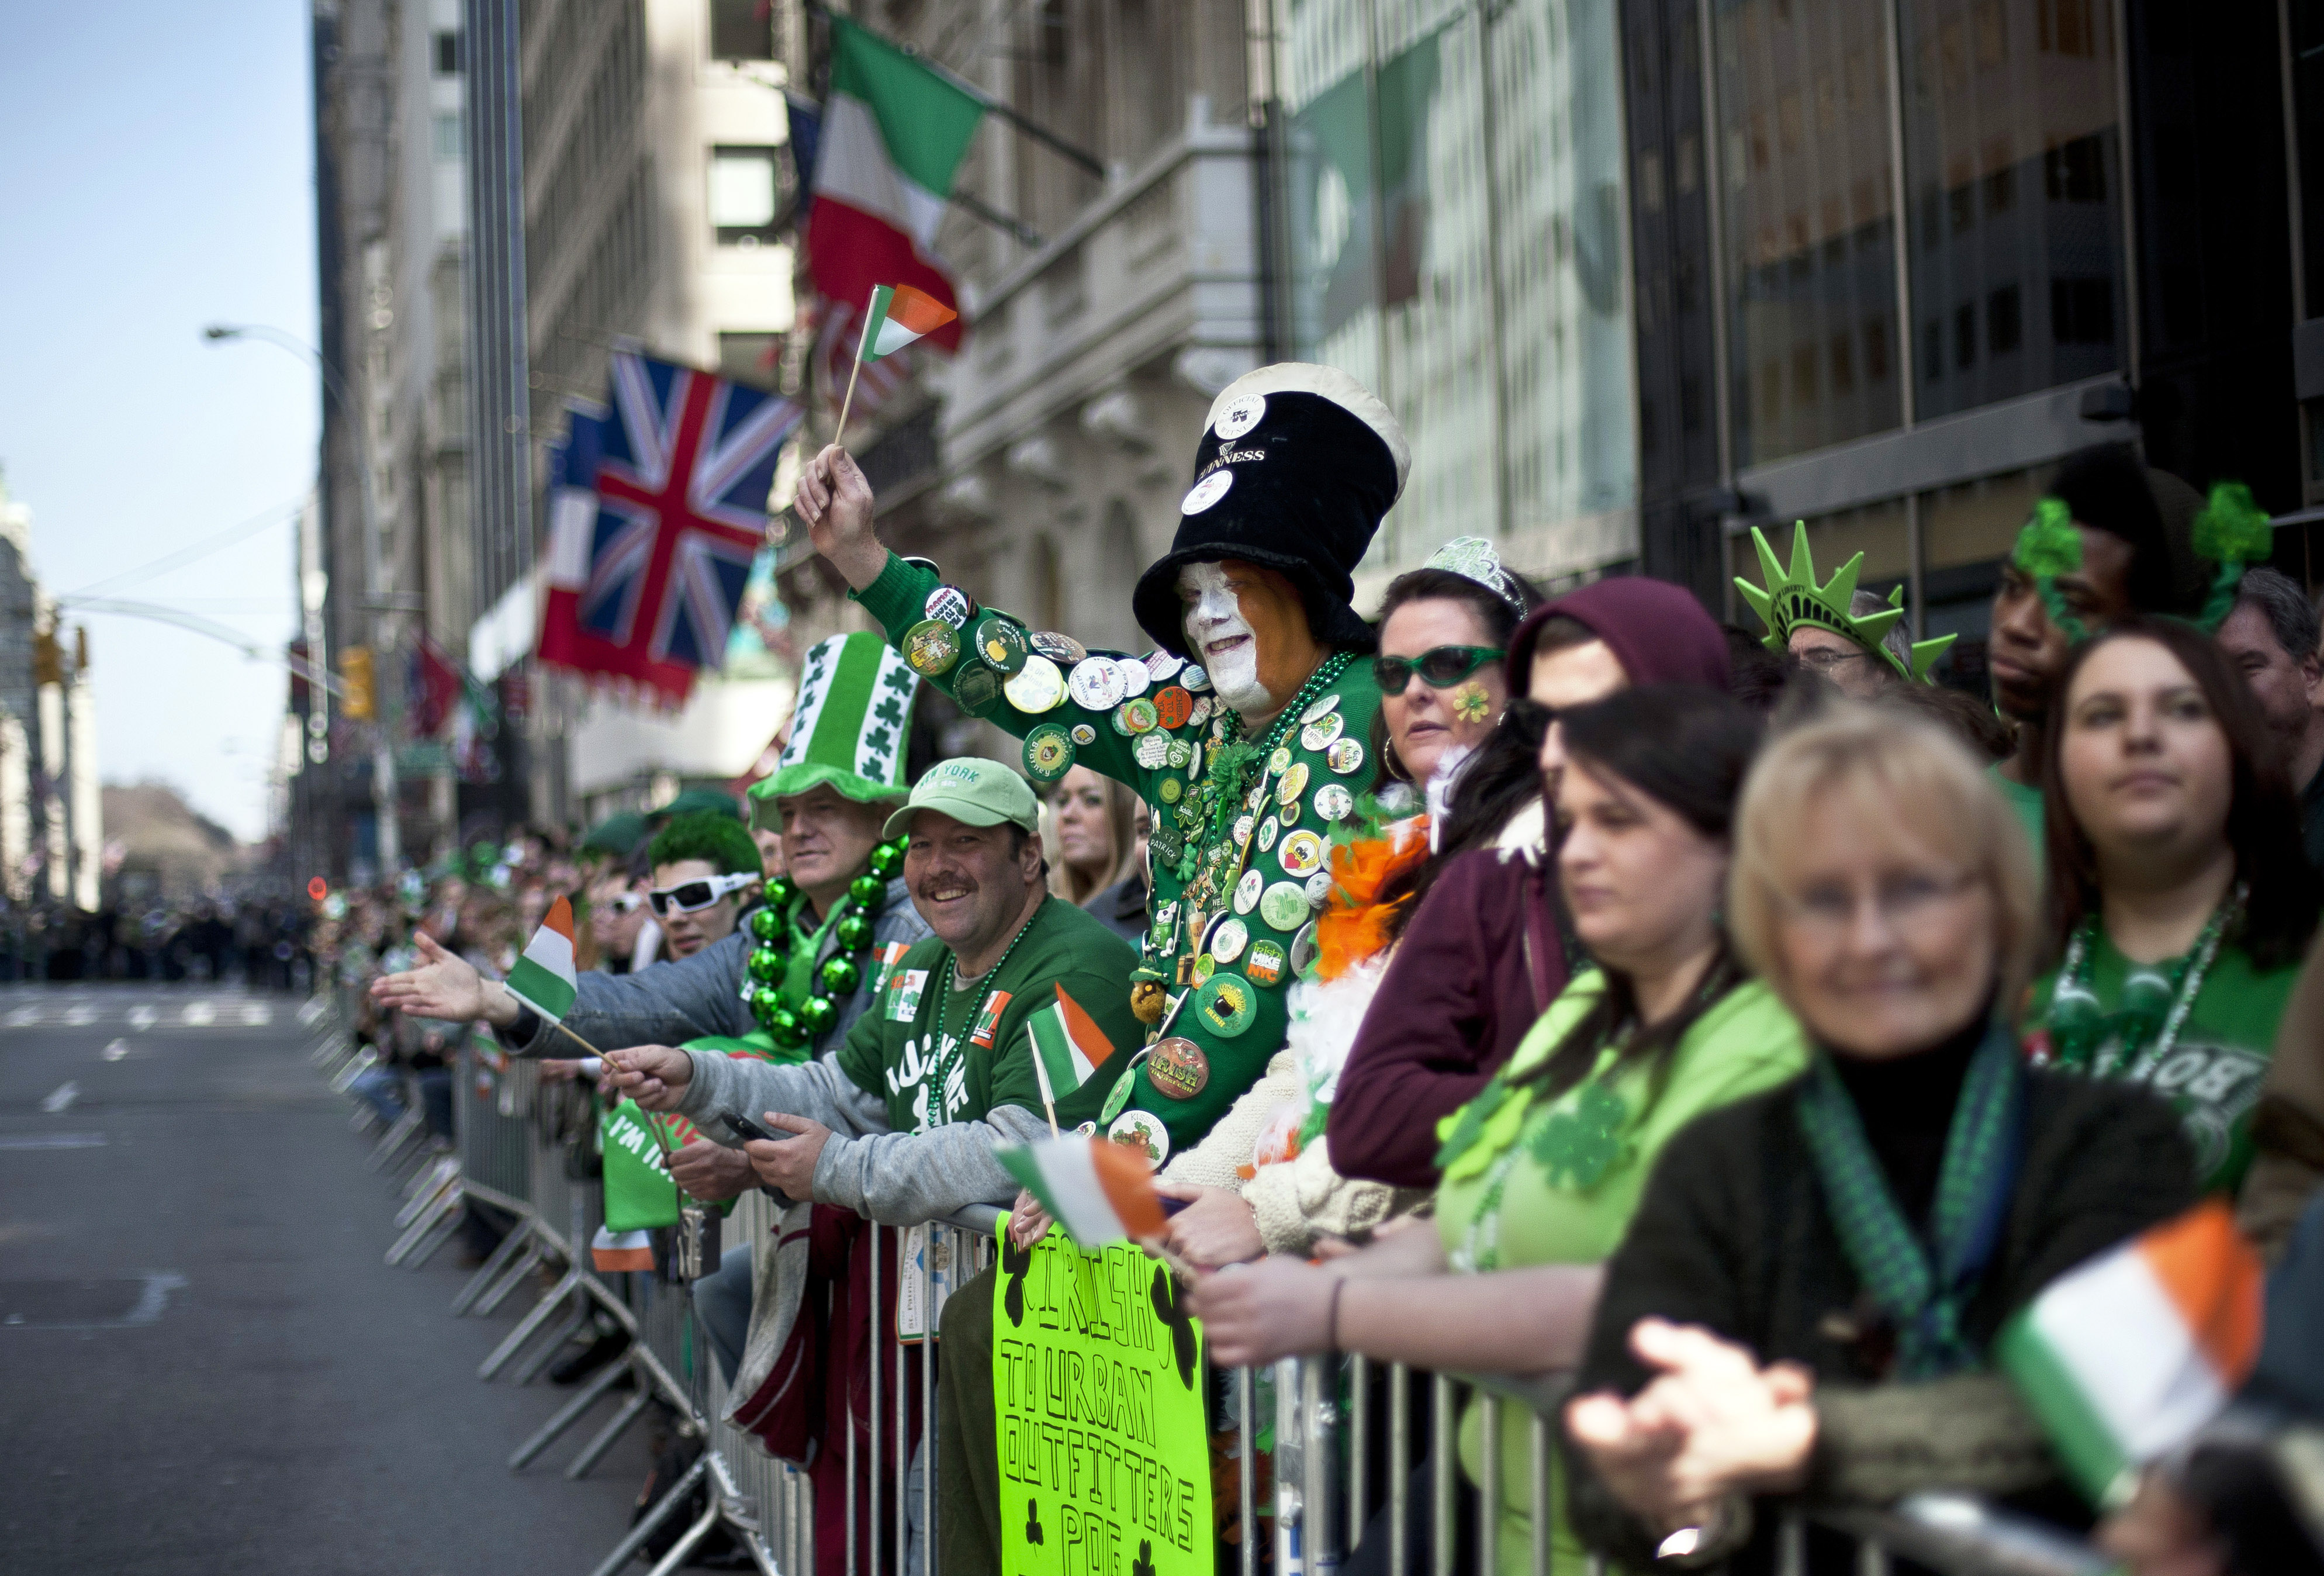 NEW YORK, NY - MARCH 17: Revelers cheer on the marchers during the 251st annual St. Patrick's Day Parade March 17, 2012 in New York City. The parade honors the patron saint of Ireland and was held for the first time in New York on March 17, 1762, 14 years before the signing of the Declaration of Independence. (Photo by Allison Joyce/Getty Images)